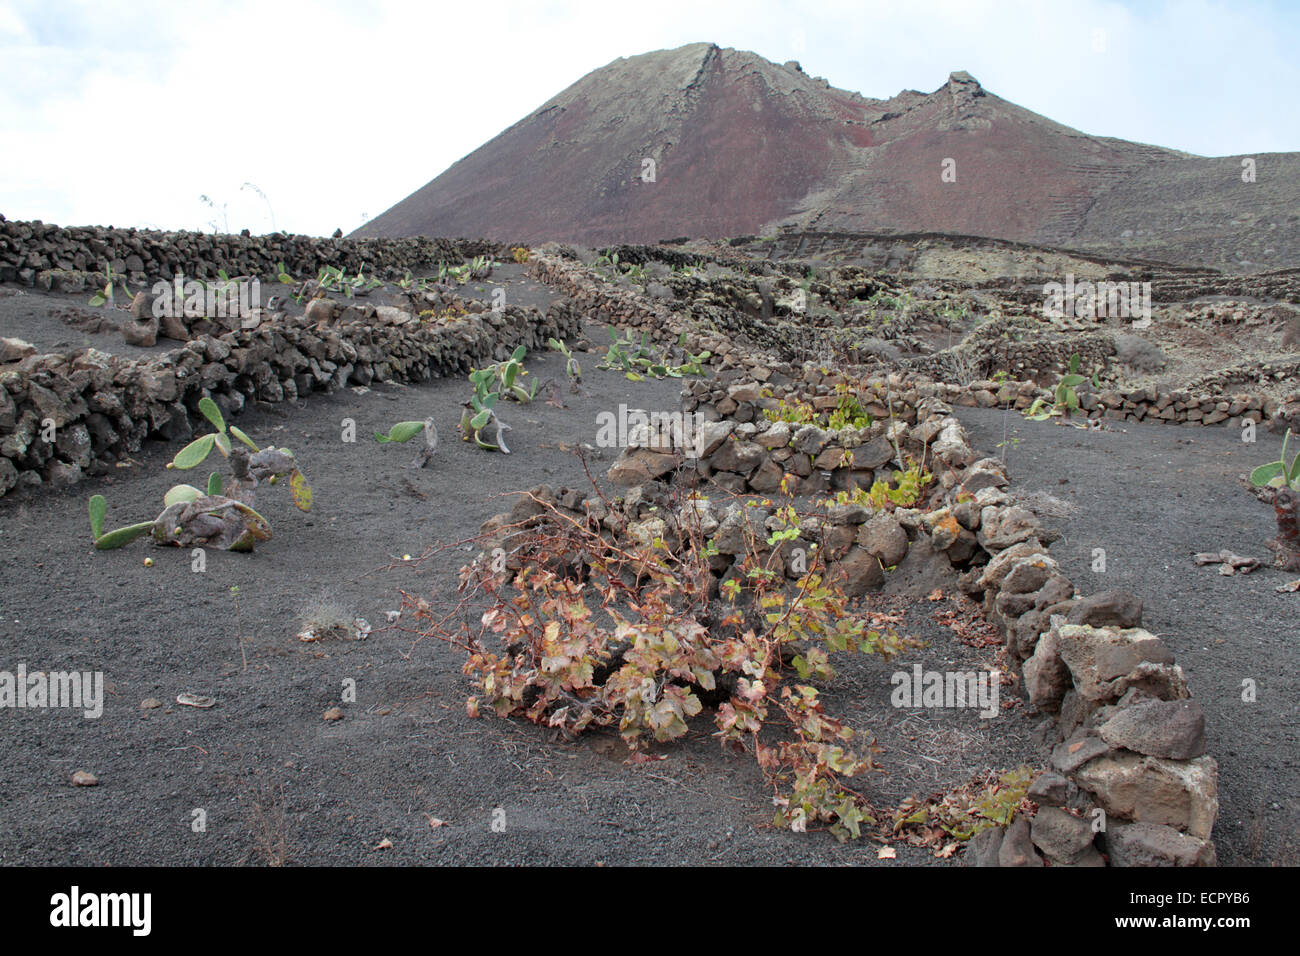 Spain - Lanzarote - Stone walls in the north part of the island Stock Photo  - Alamy